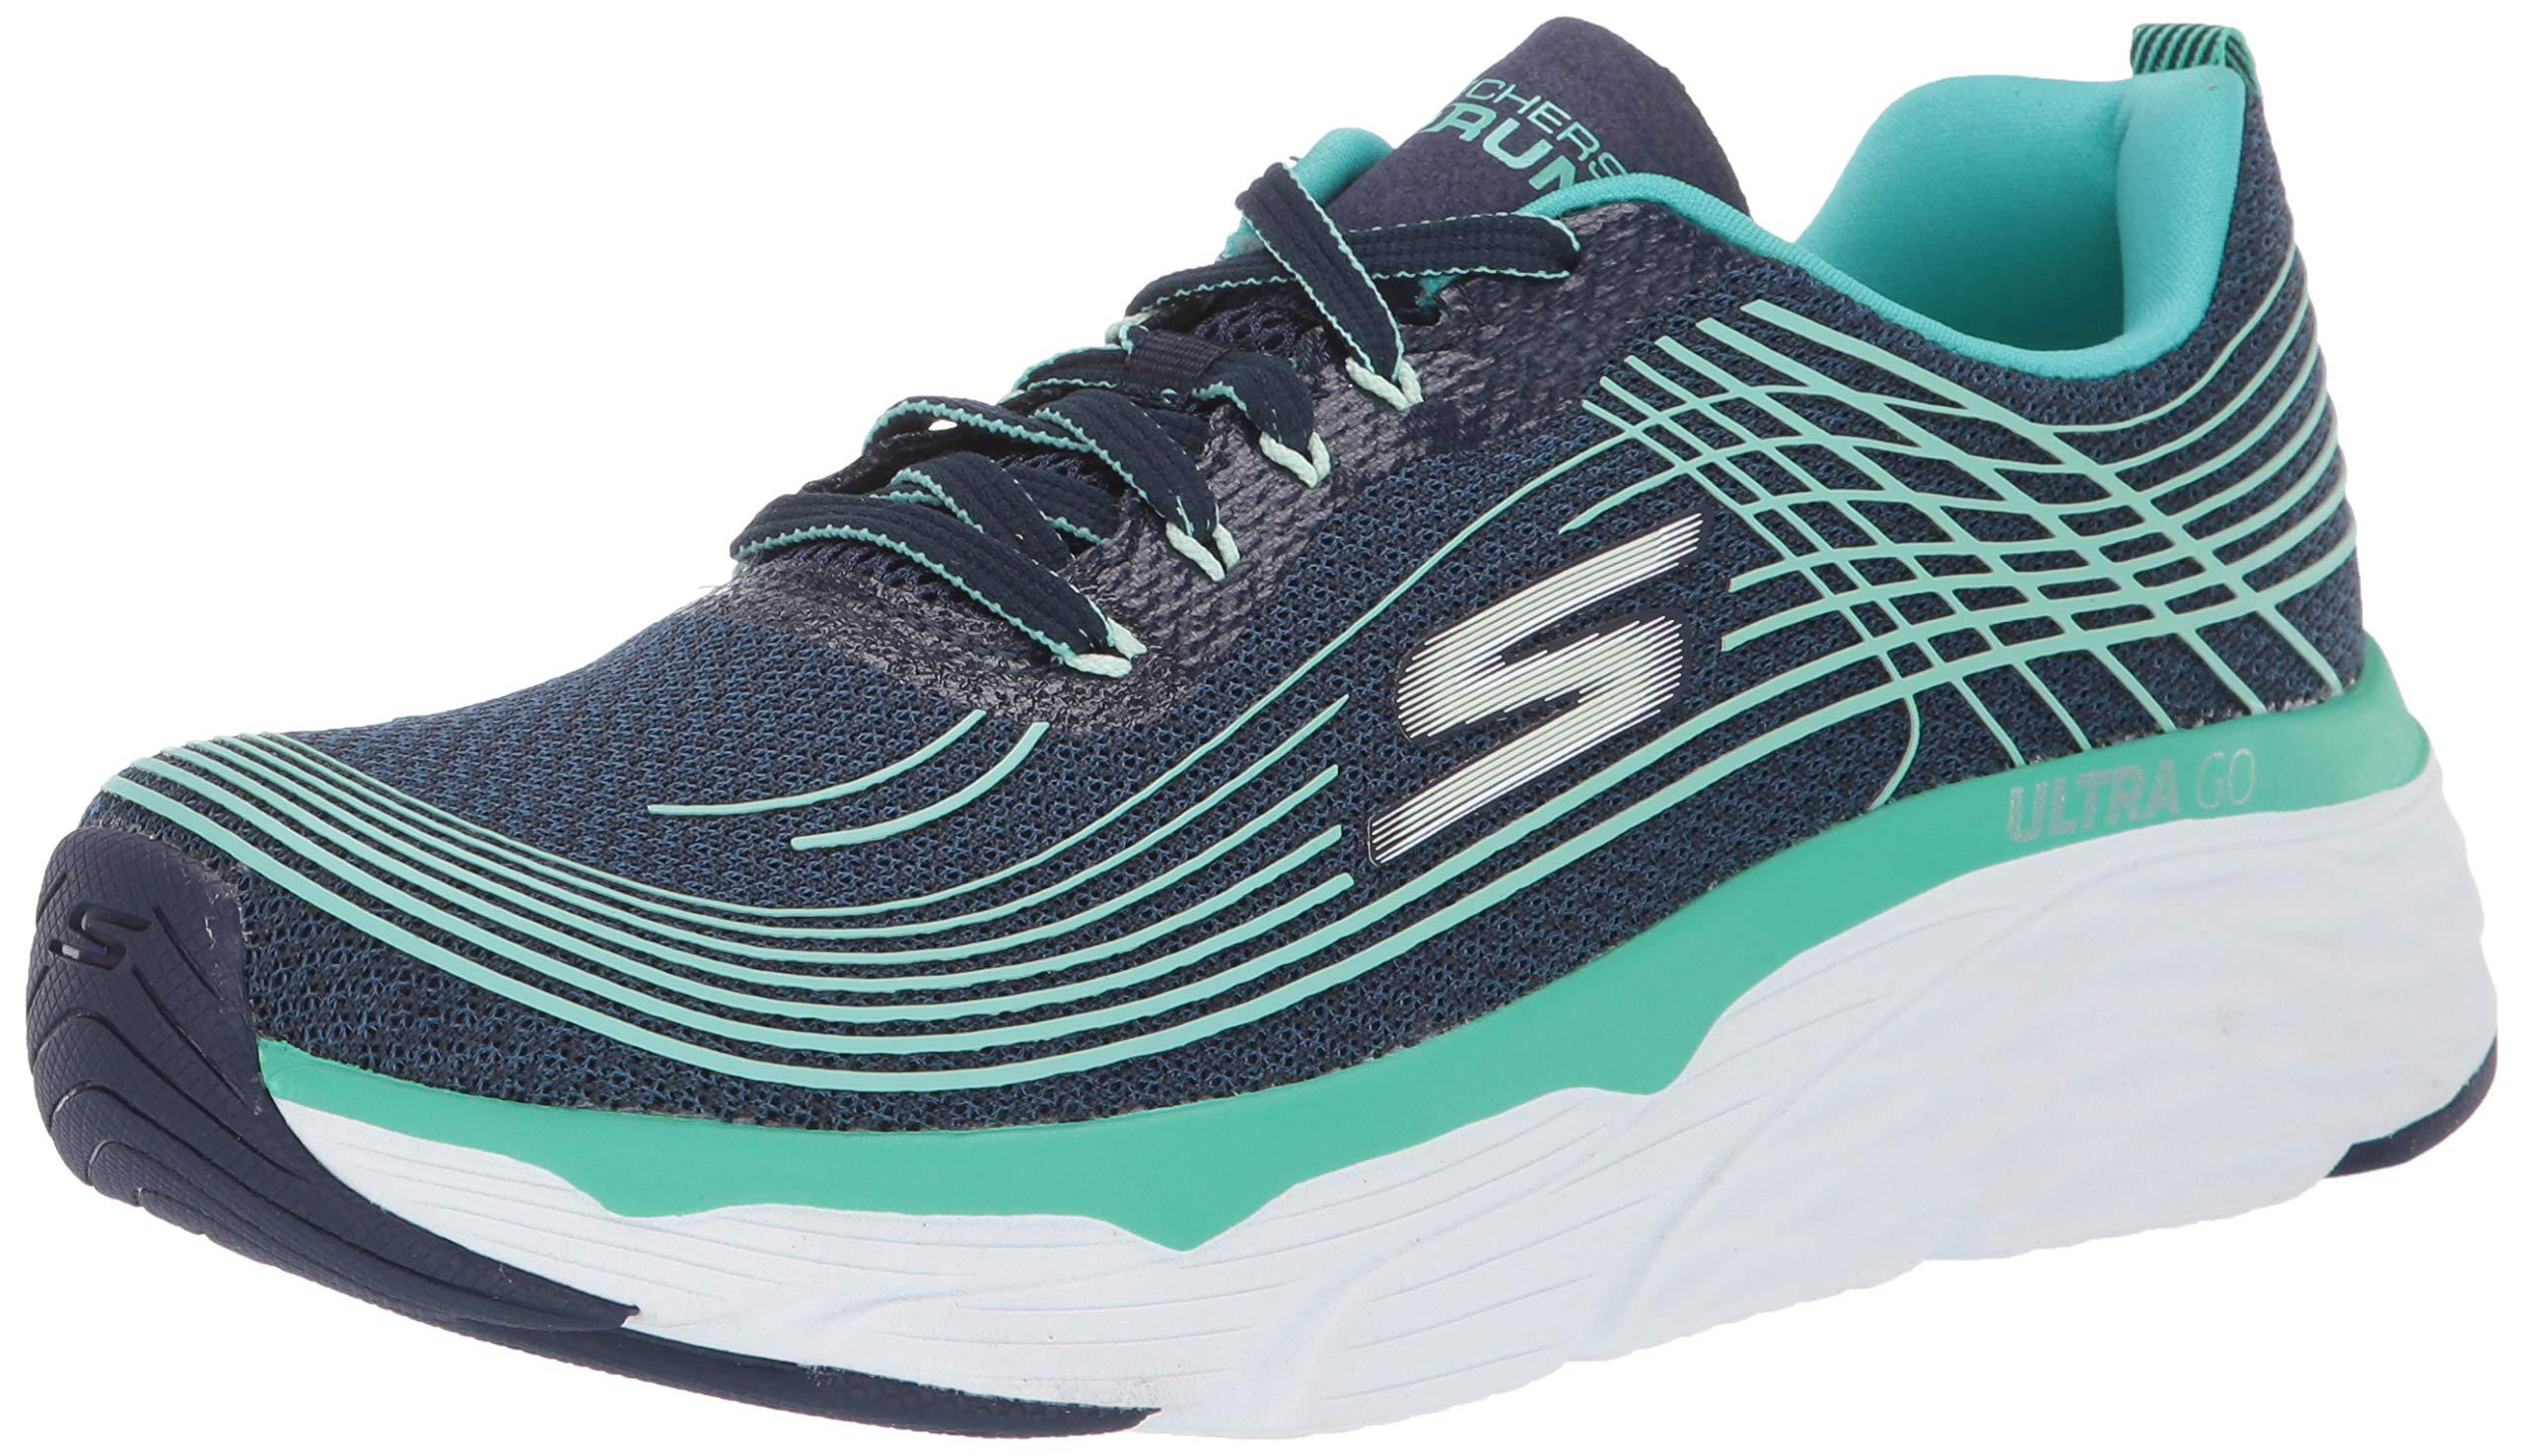 Skechers Max Cushion-17693 Sneaker in Navy/Turquoise (Blue) - Save 3% ...